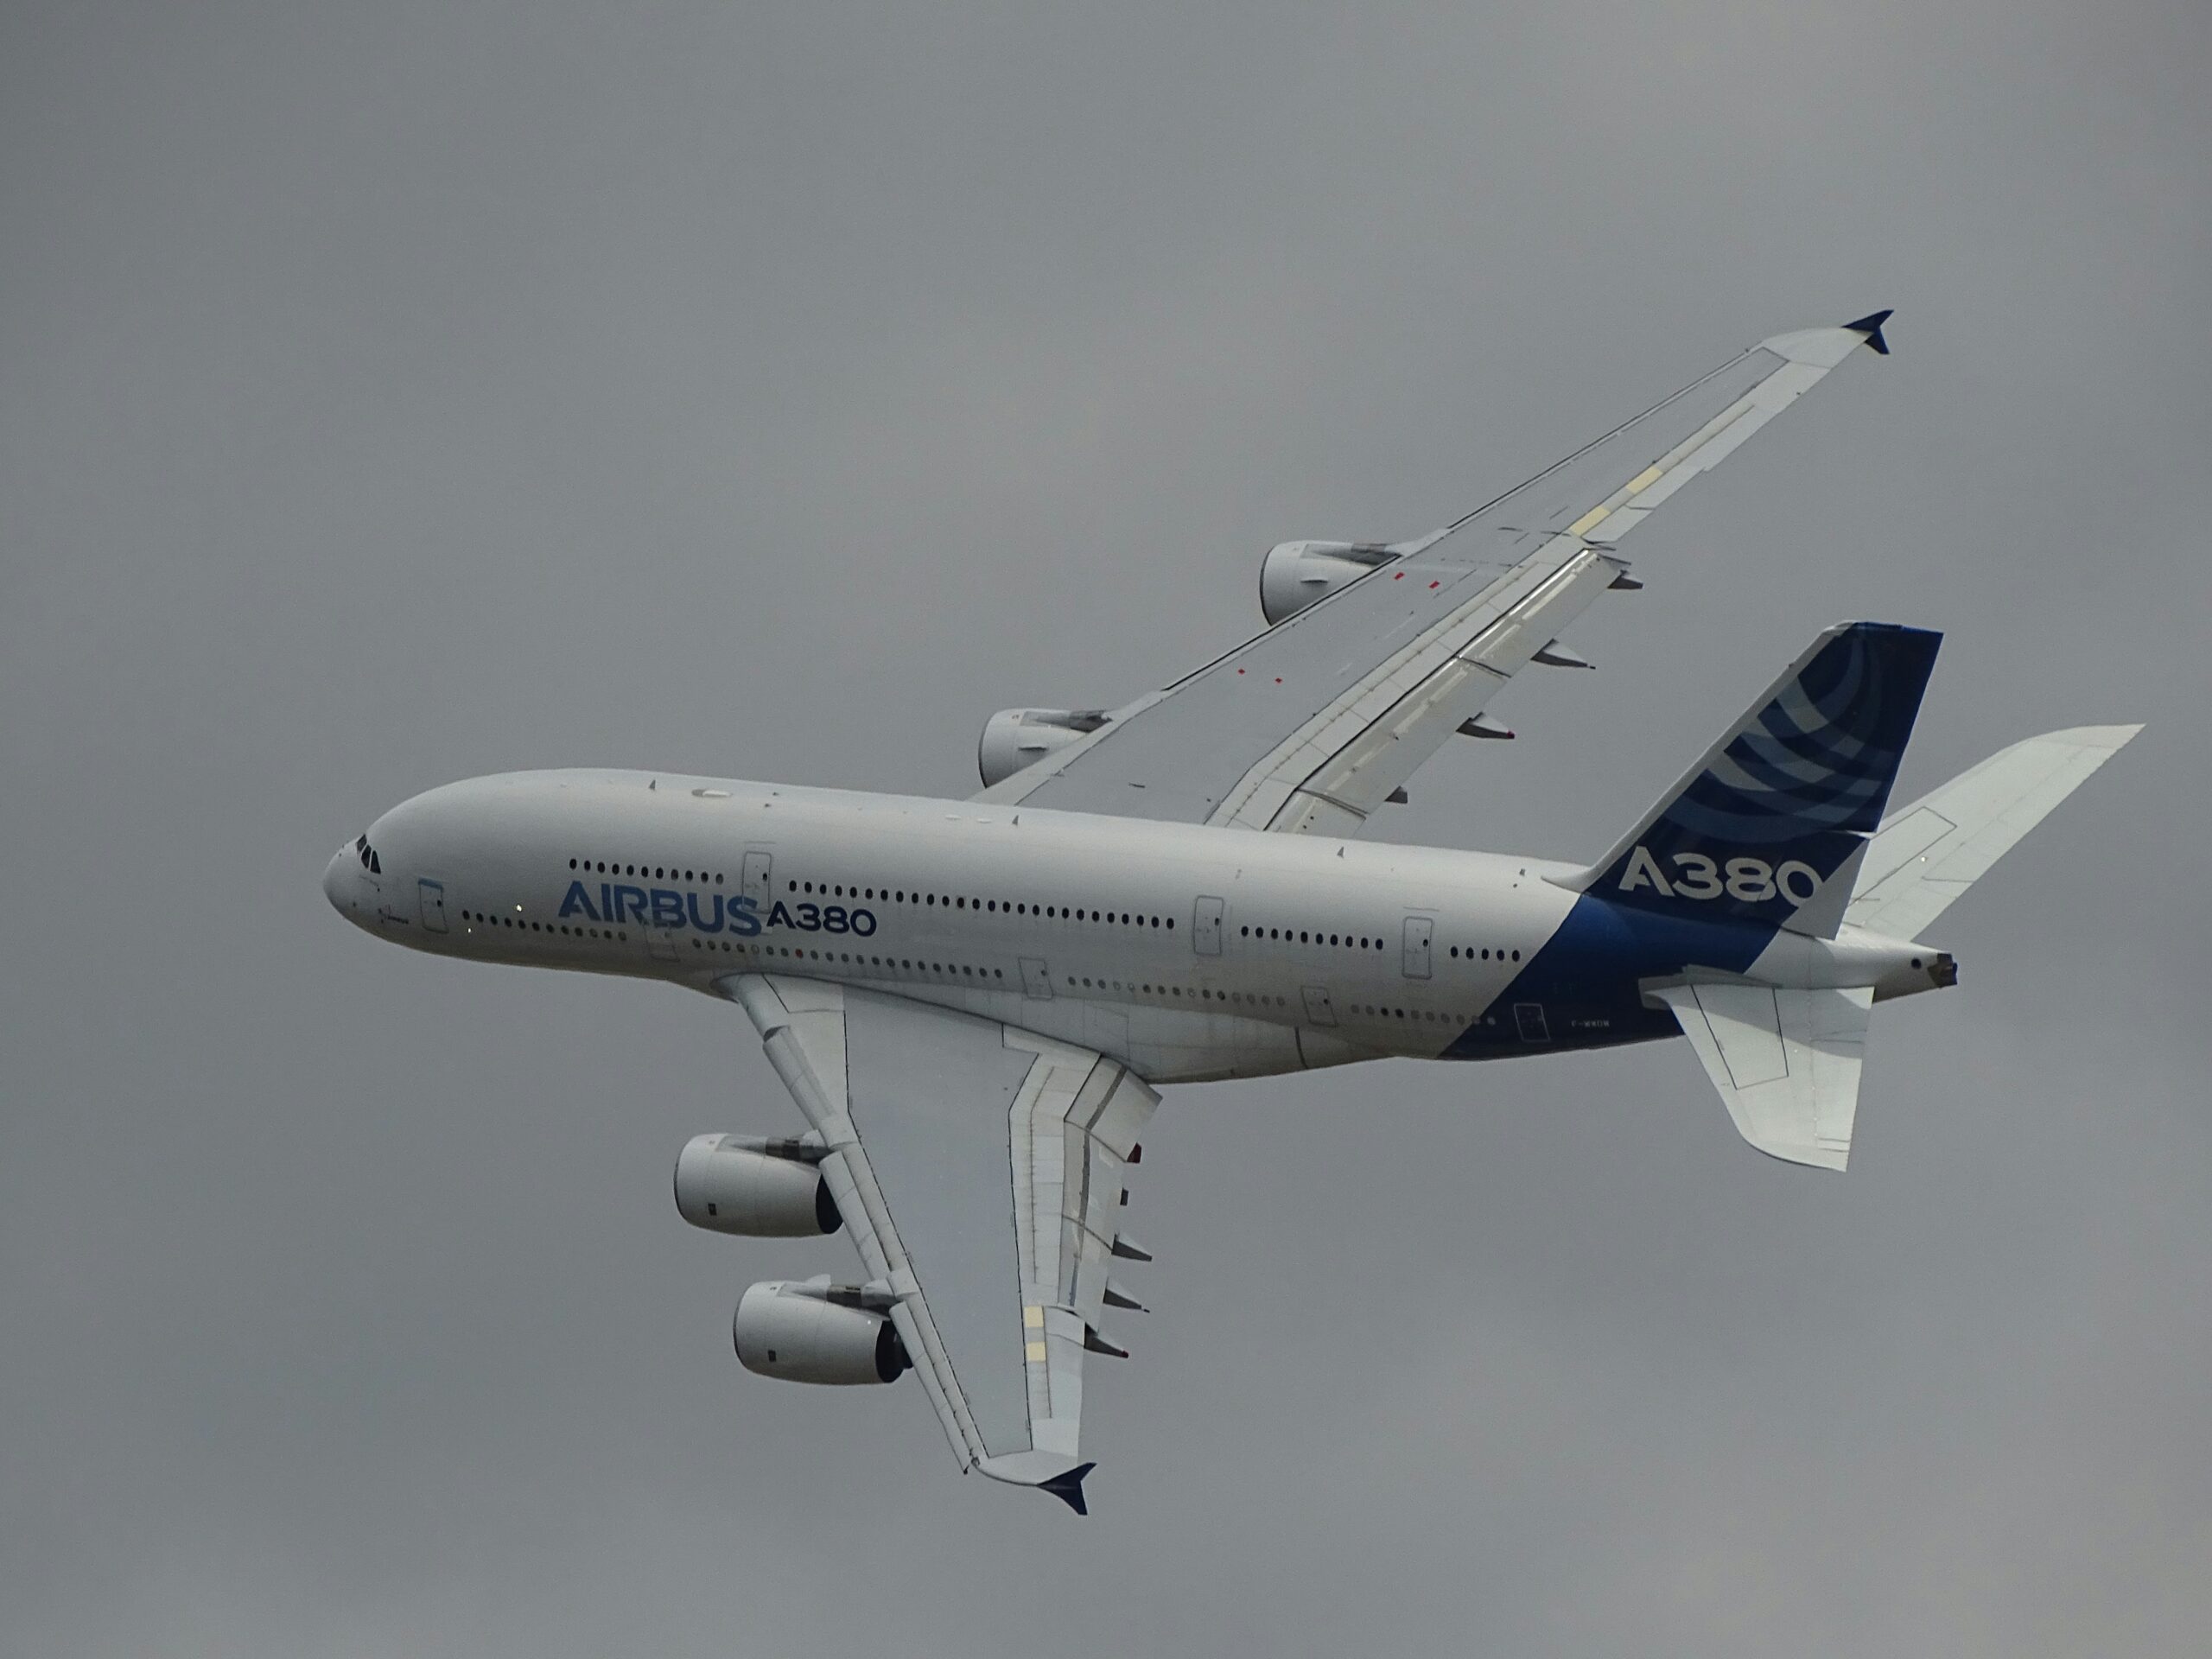 Learn more about the airplane production industry and other manufacturers. 
pictured: an Airbus plane flying on a cloudy day